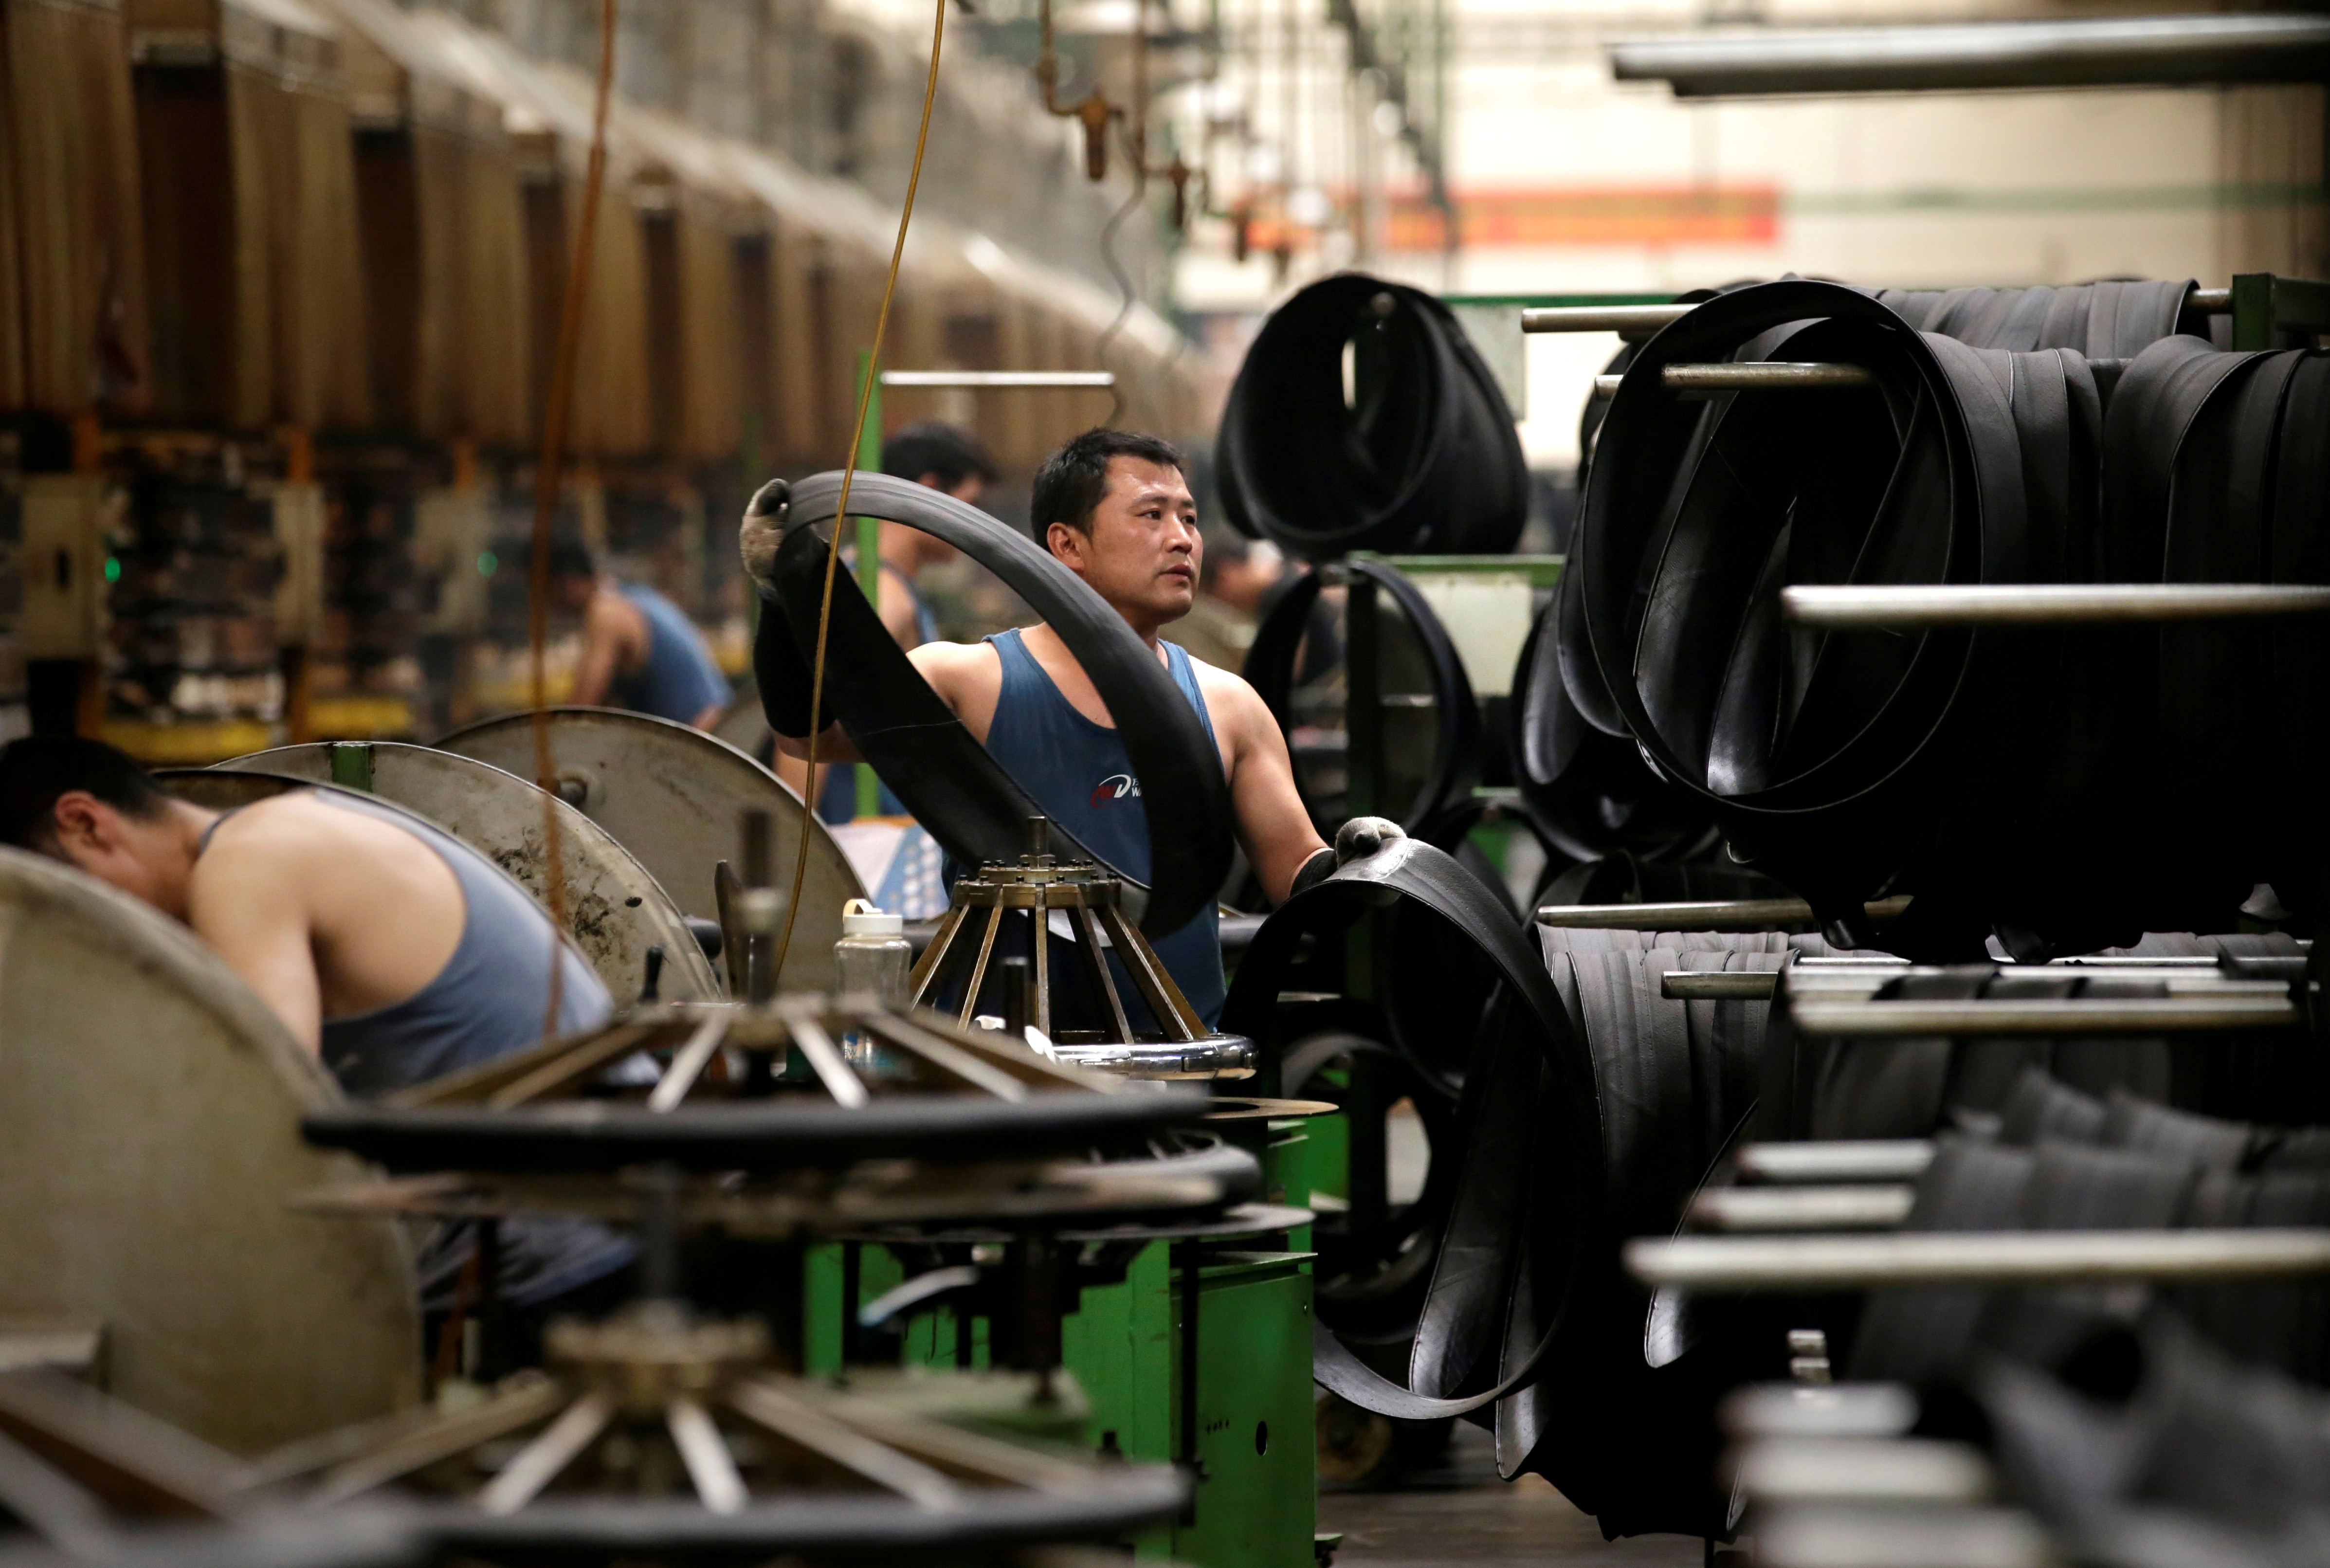 China’s gruelling trade war with the US has hit exports and factory output. Photo: Reuters